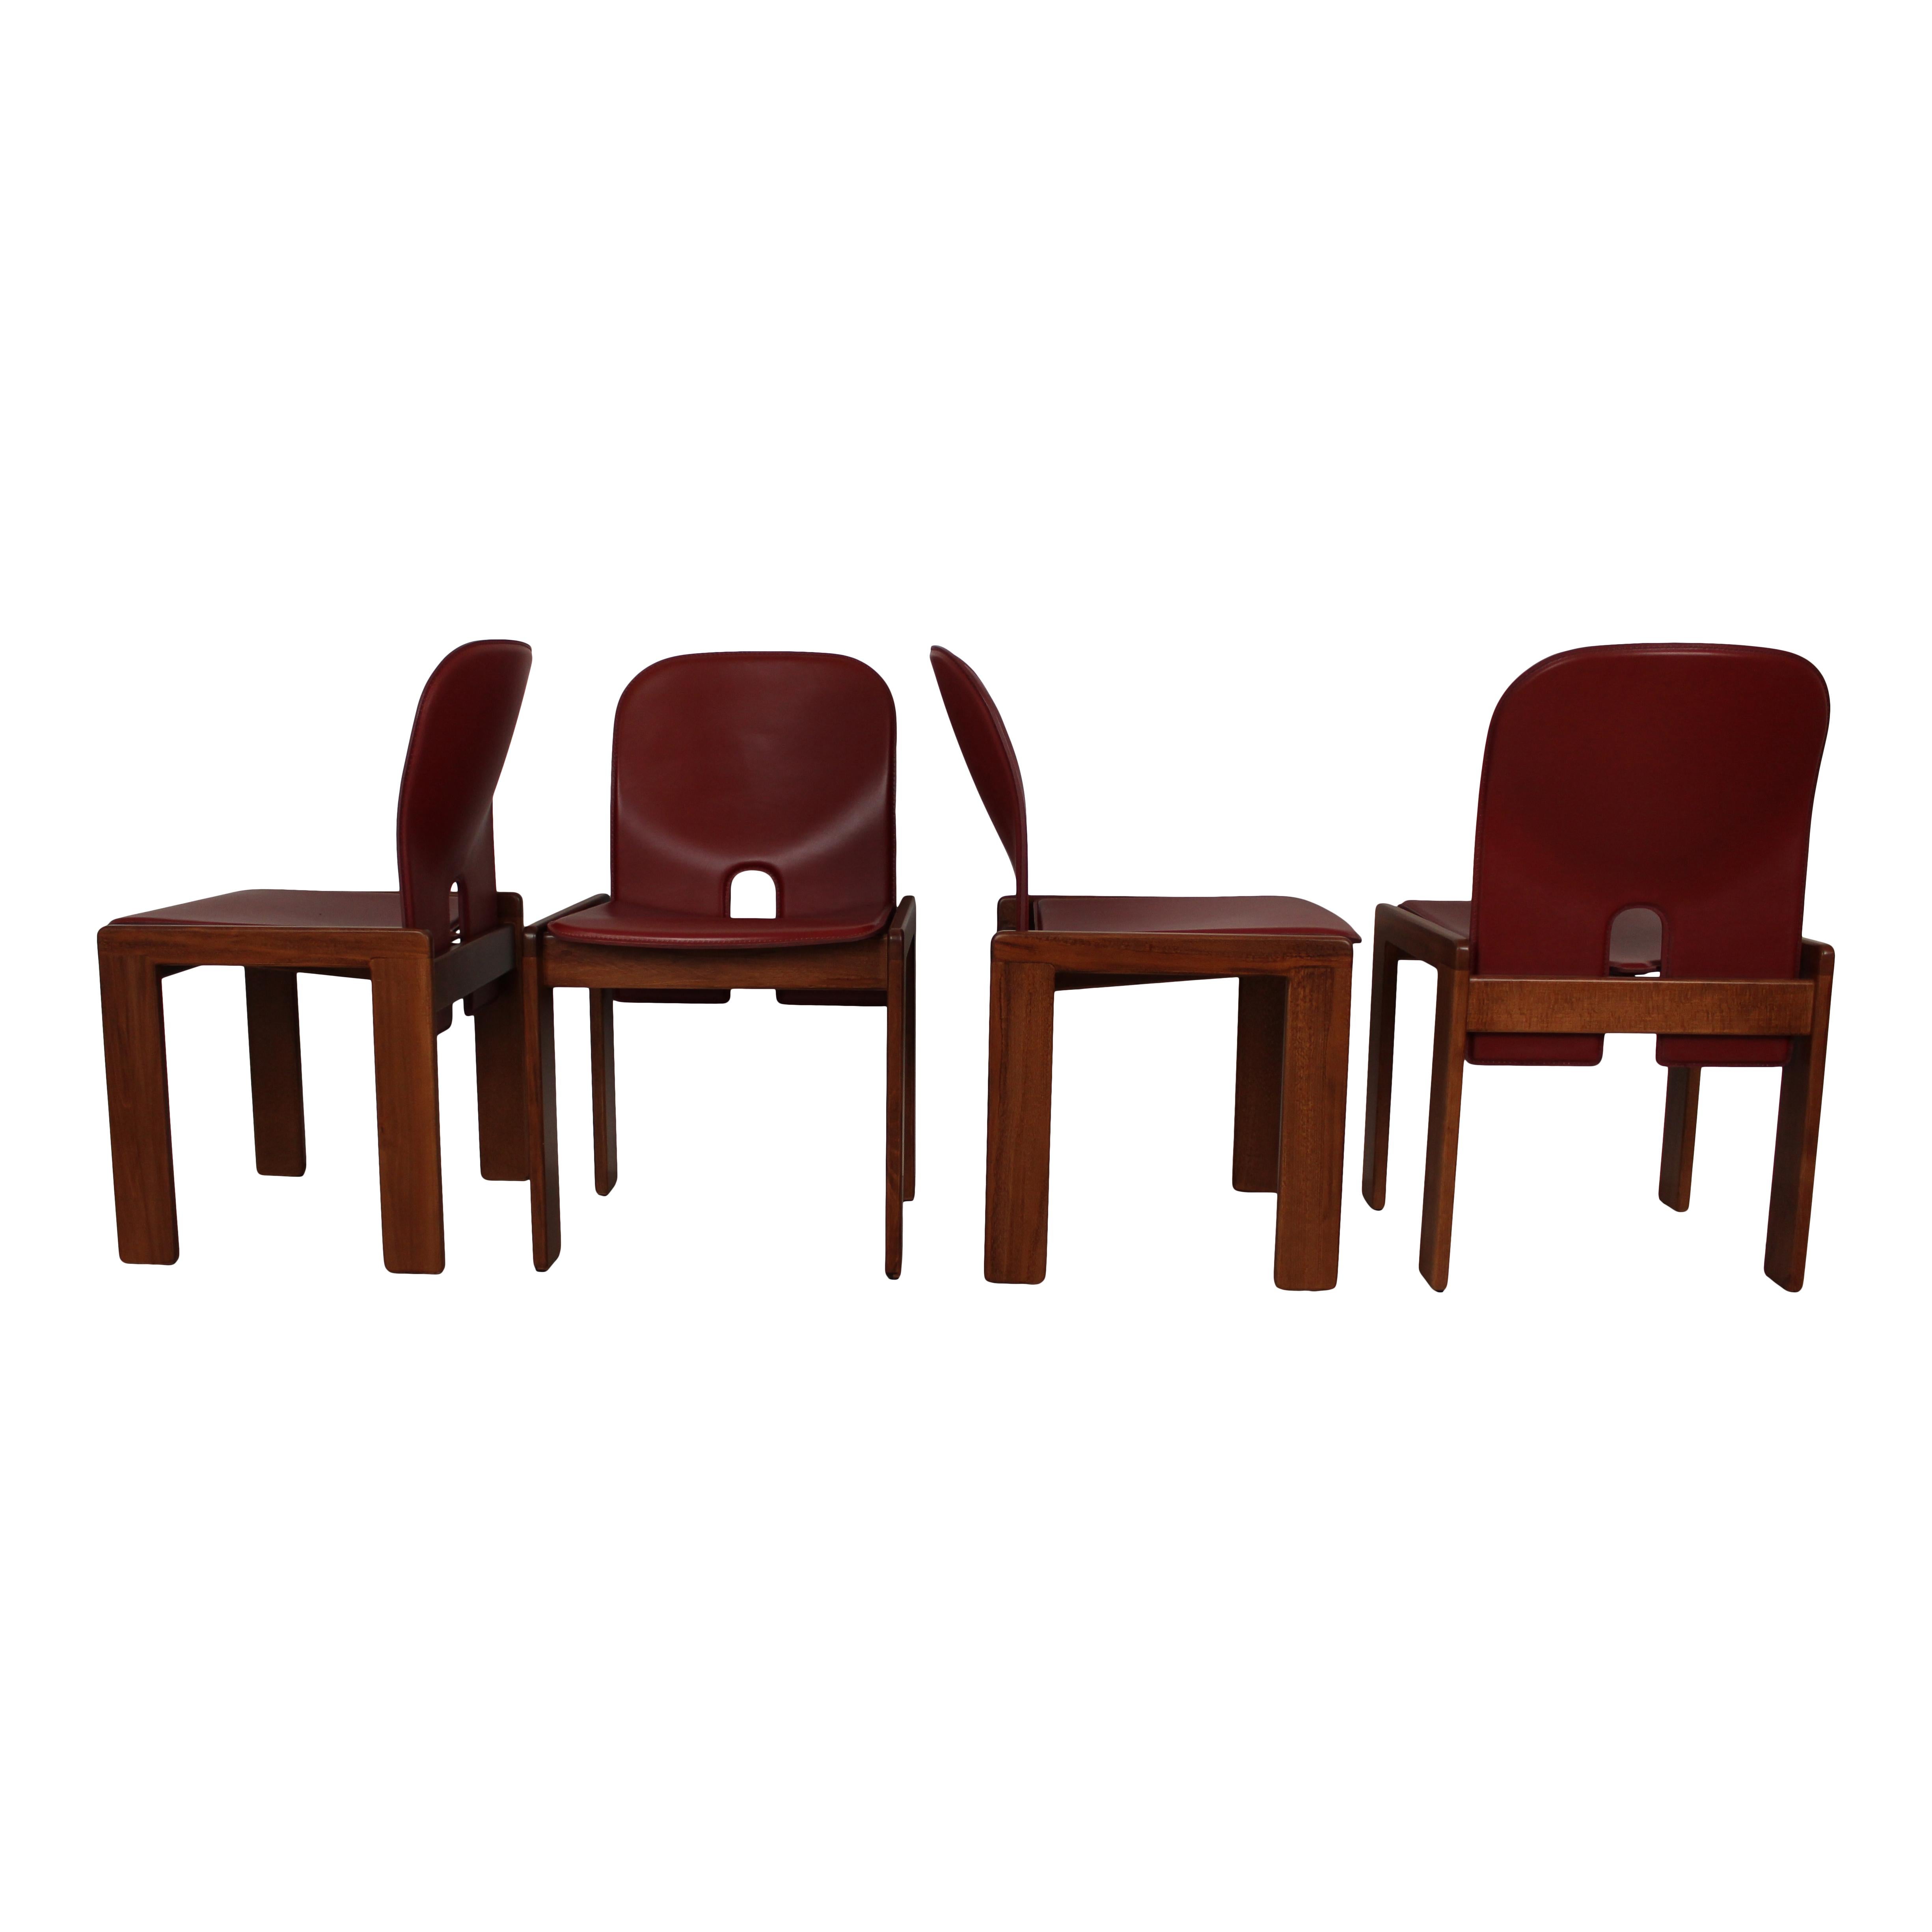 Set of four Model 121 dining chairs, designed by Afra and Tobia Scarpa and produced by the Italian manufacturer Cassina in 1967.
They feature English red leather upholstery and a walnut structure.

Fully restored in Italy.

Afra and Tobia Scarpa